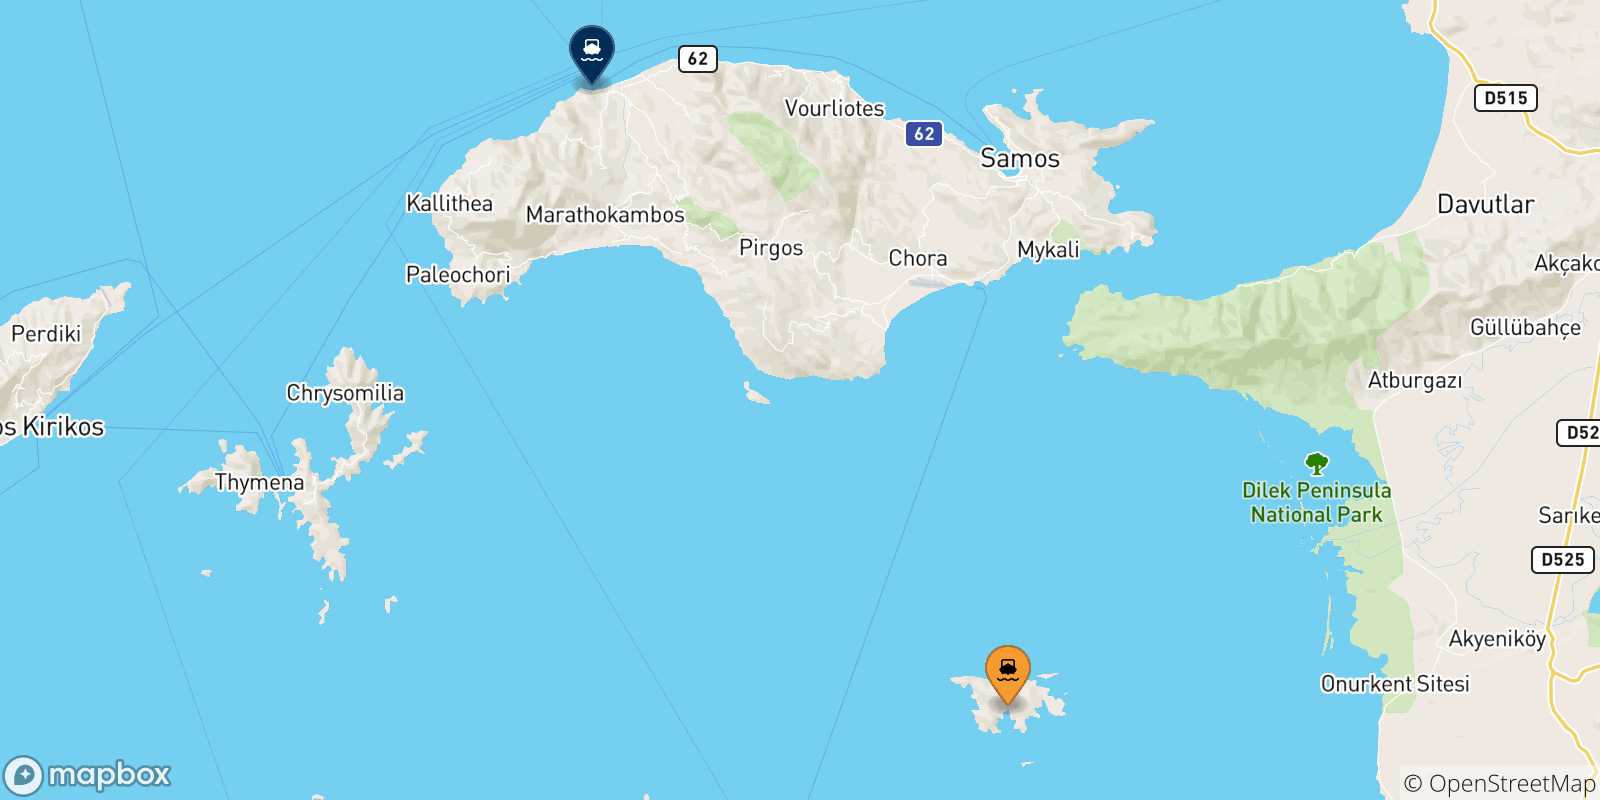 Map of the possible routes between Agathonisi and Aegean Islands